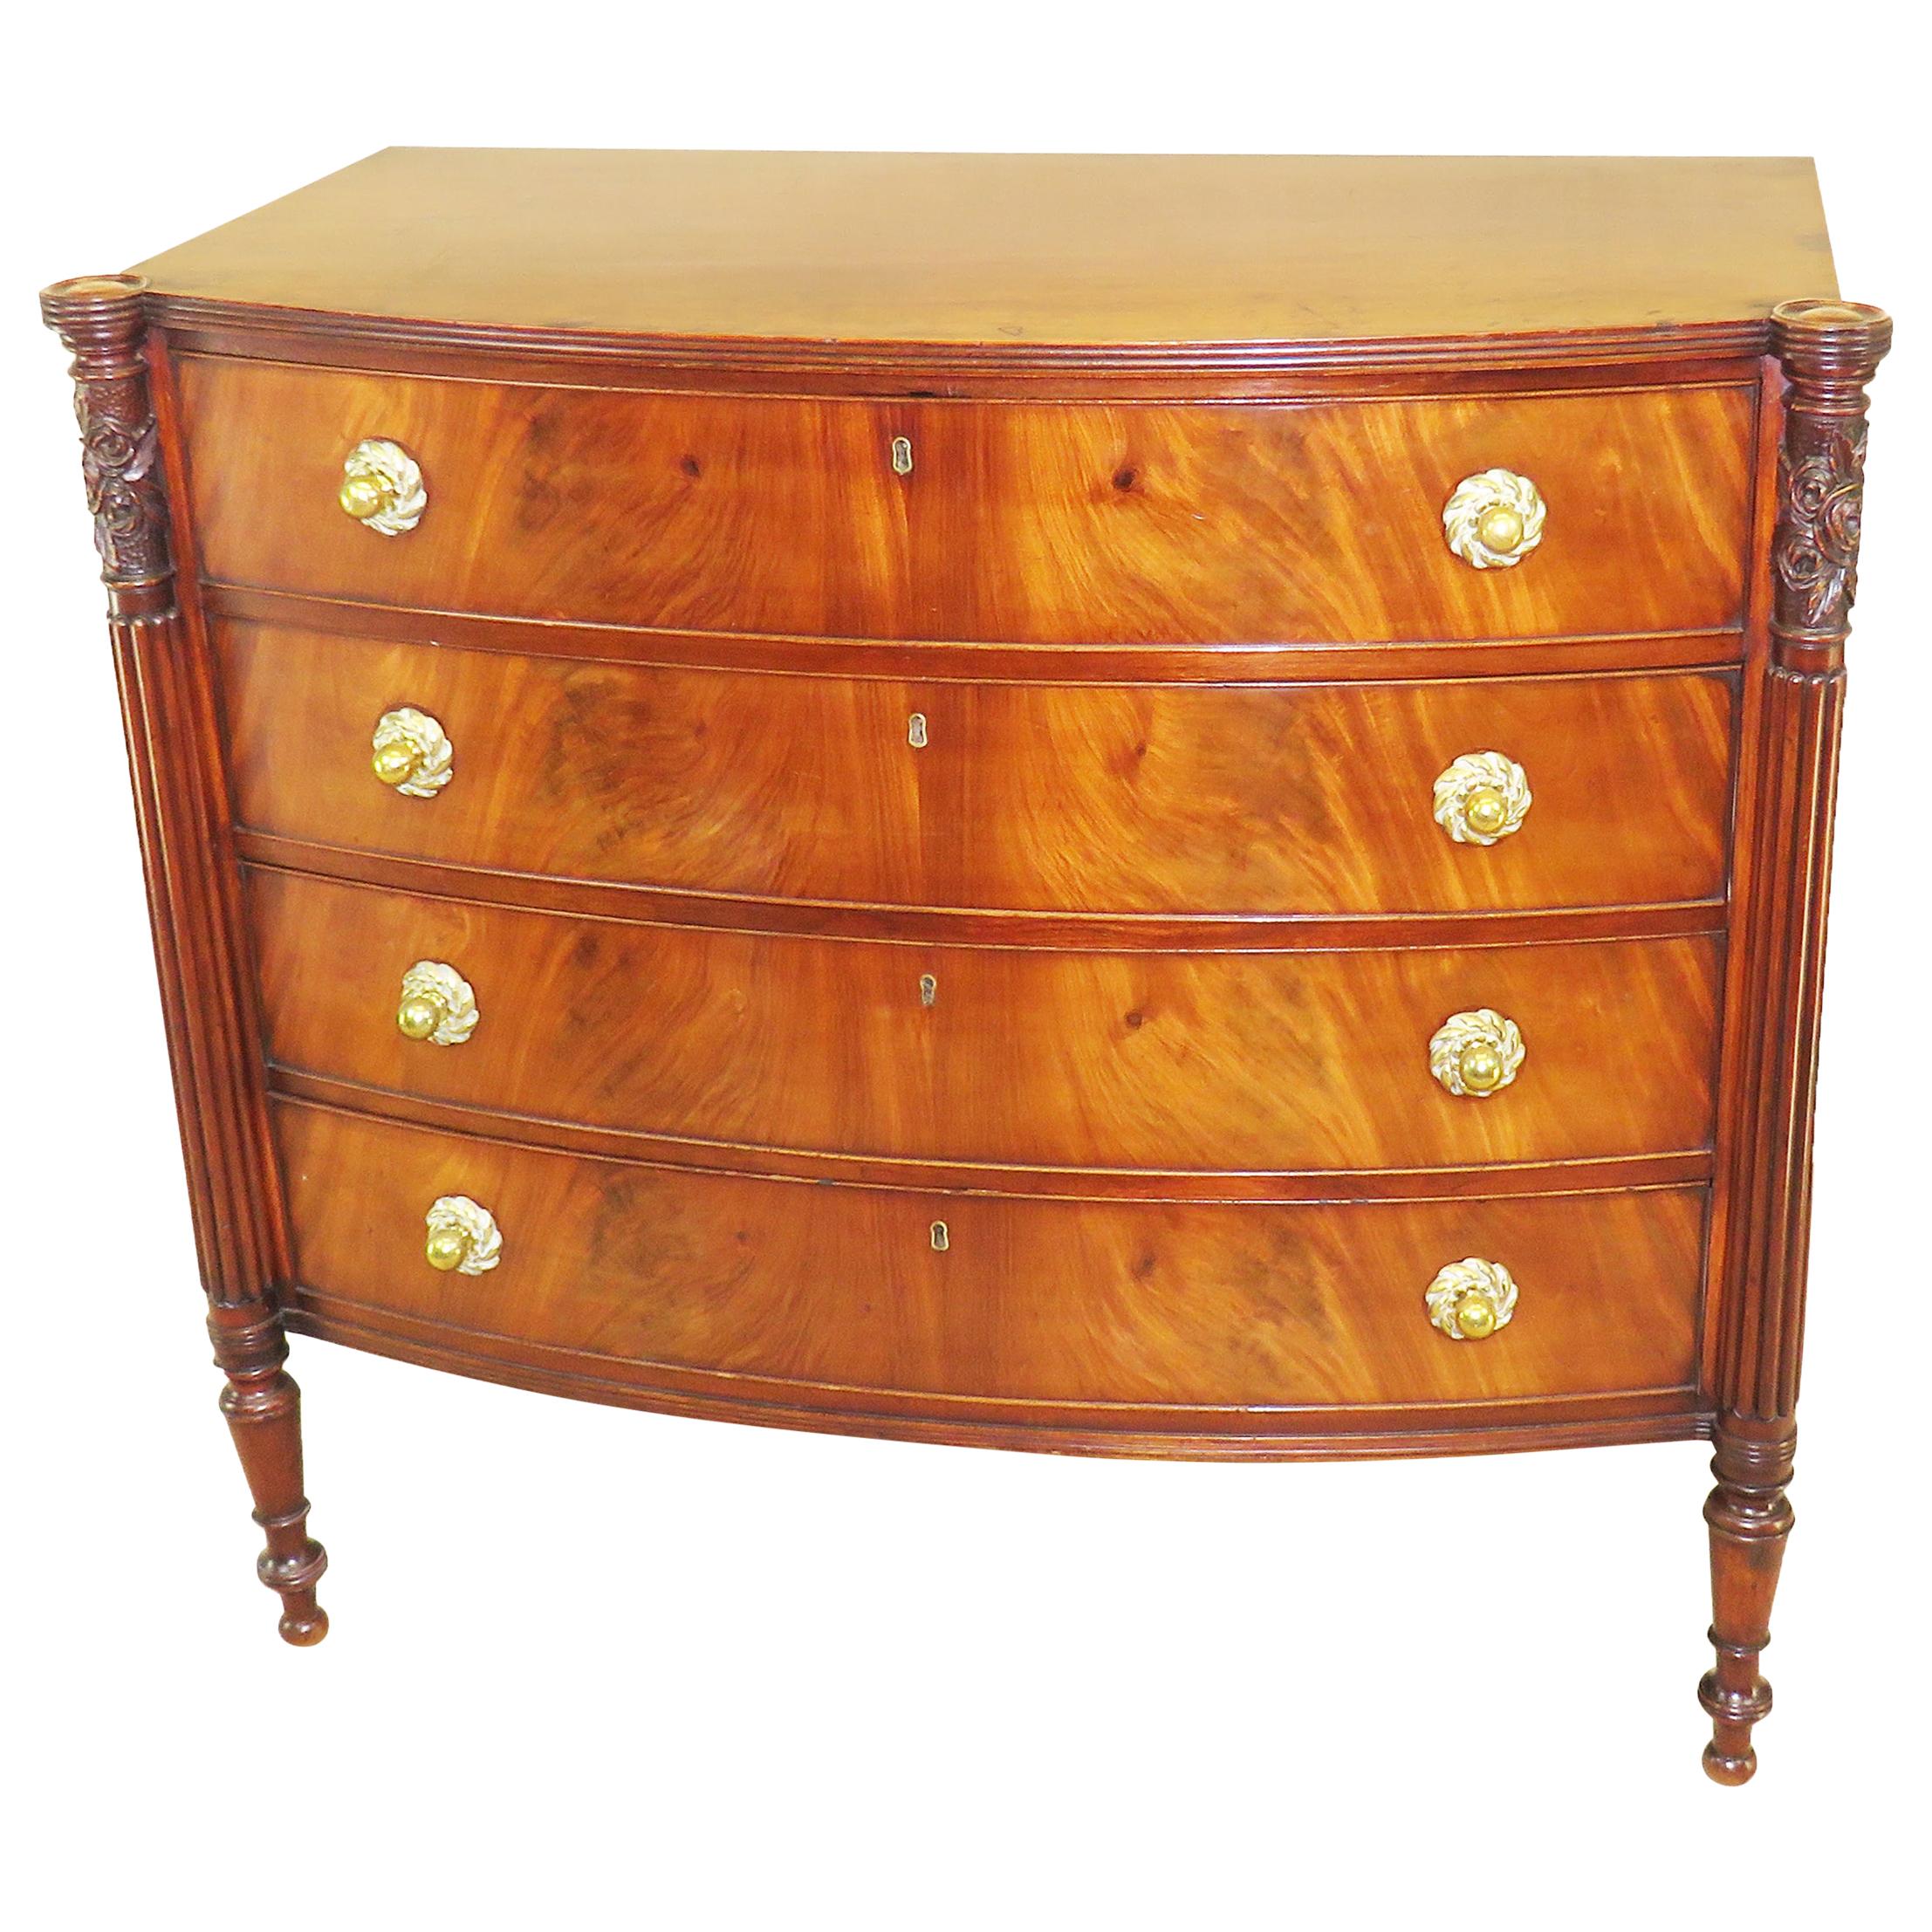 American 19th Century Federal Mahogany Bow Chest of Drawers